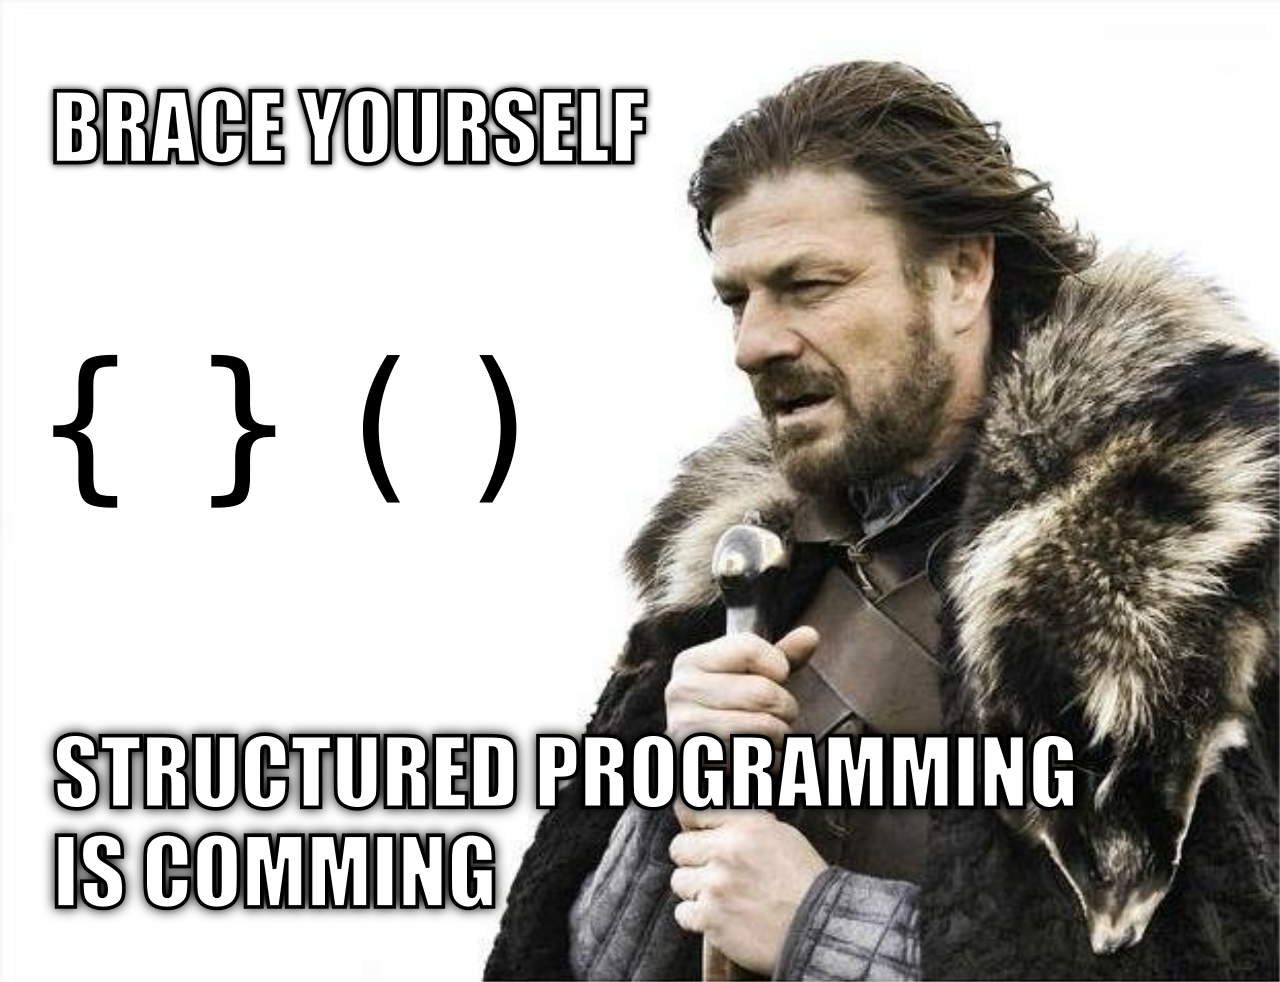 Brace Yourself, Structured Programming is Comming.